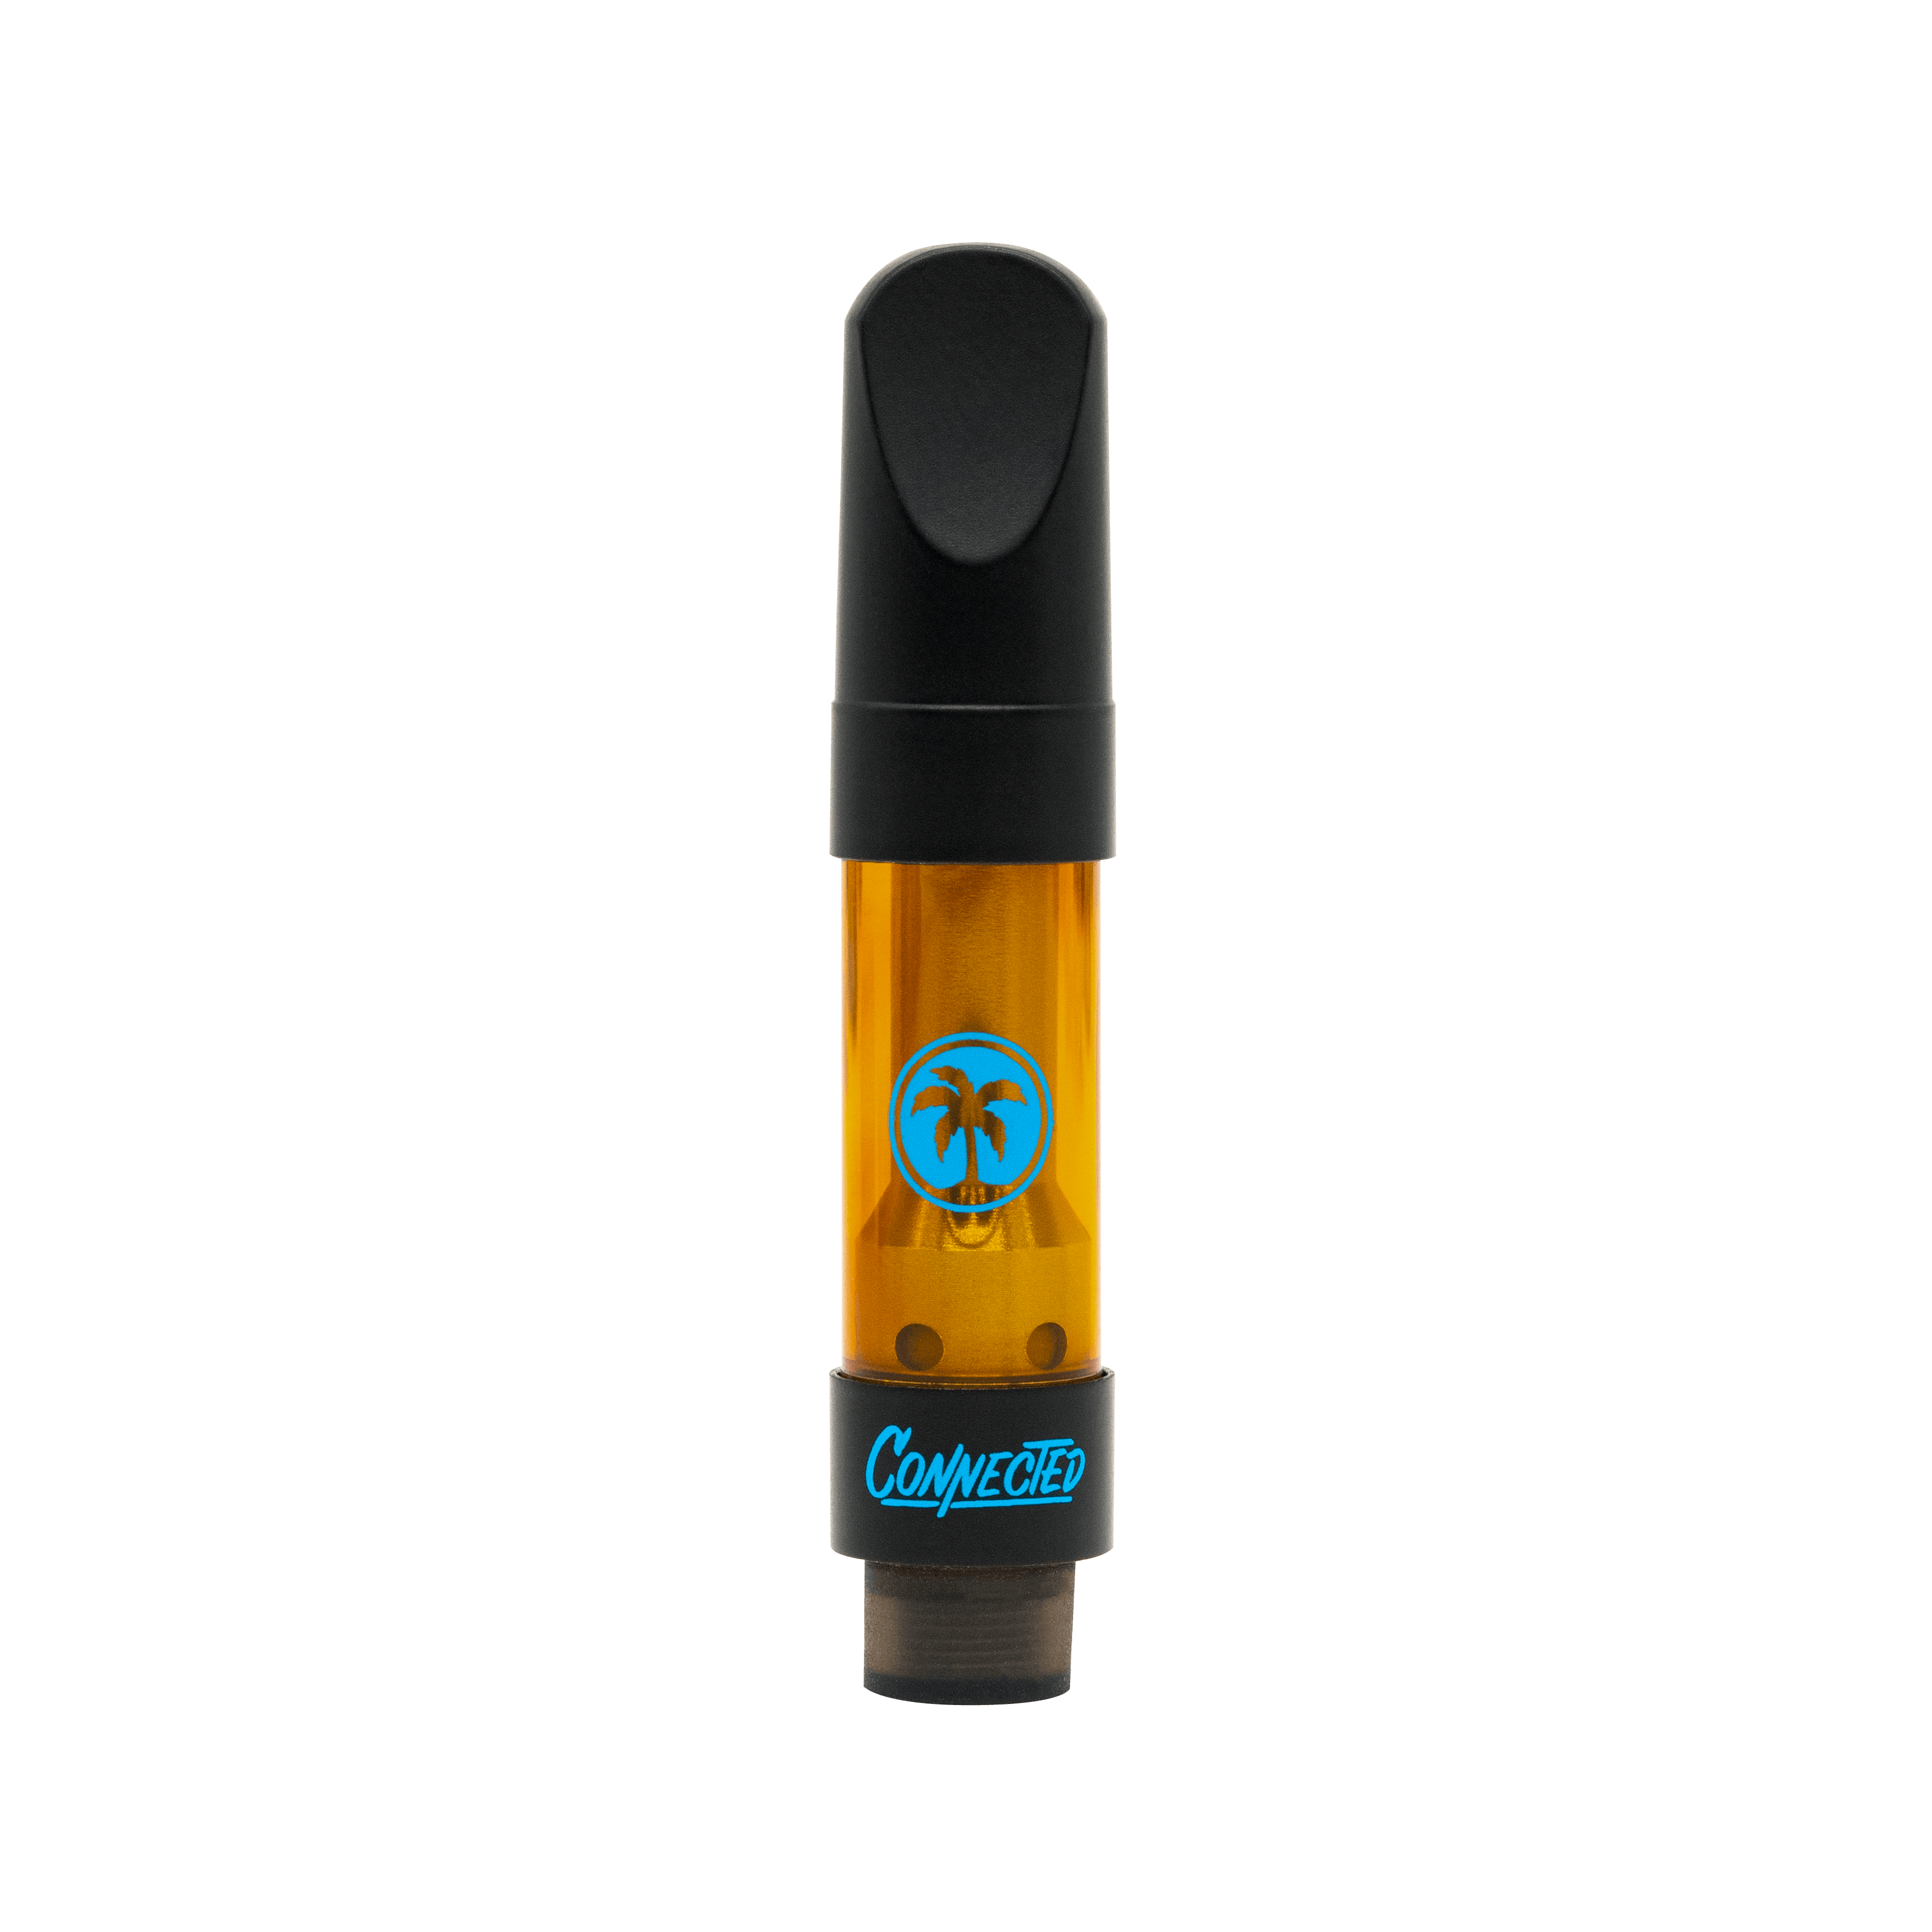 St. Lucia OG Live Resin Cartridge (1G) - Connected Cannabis Co